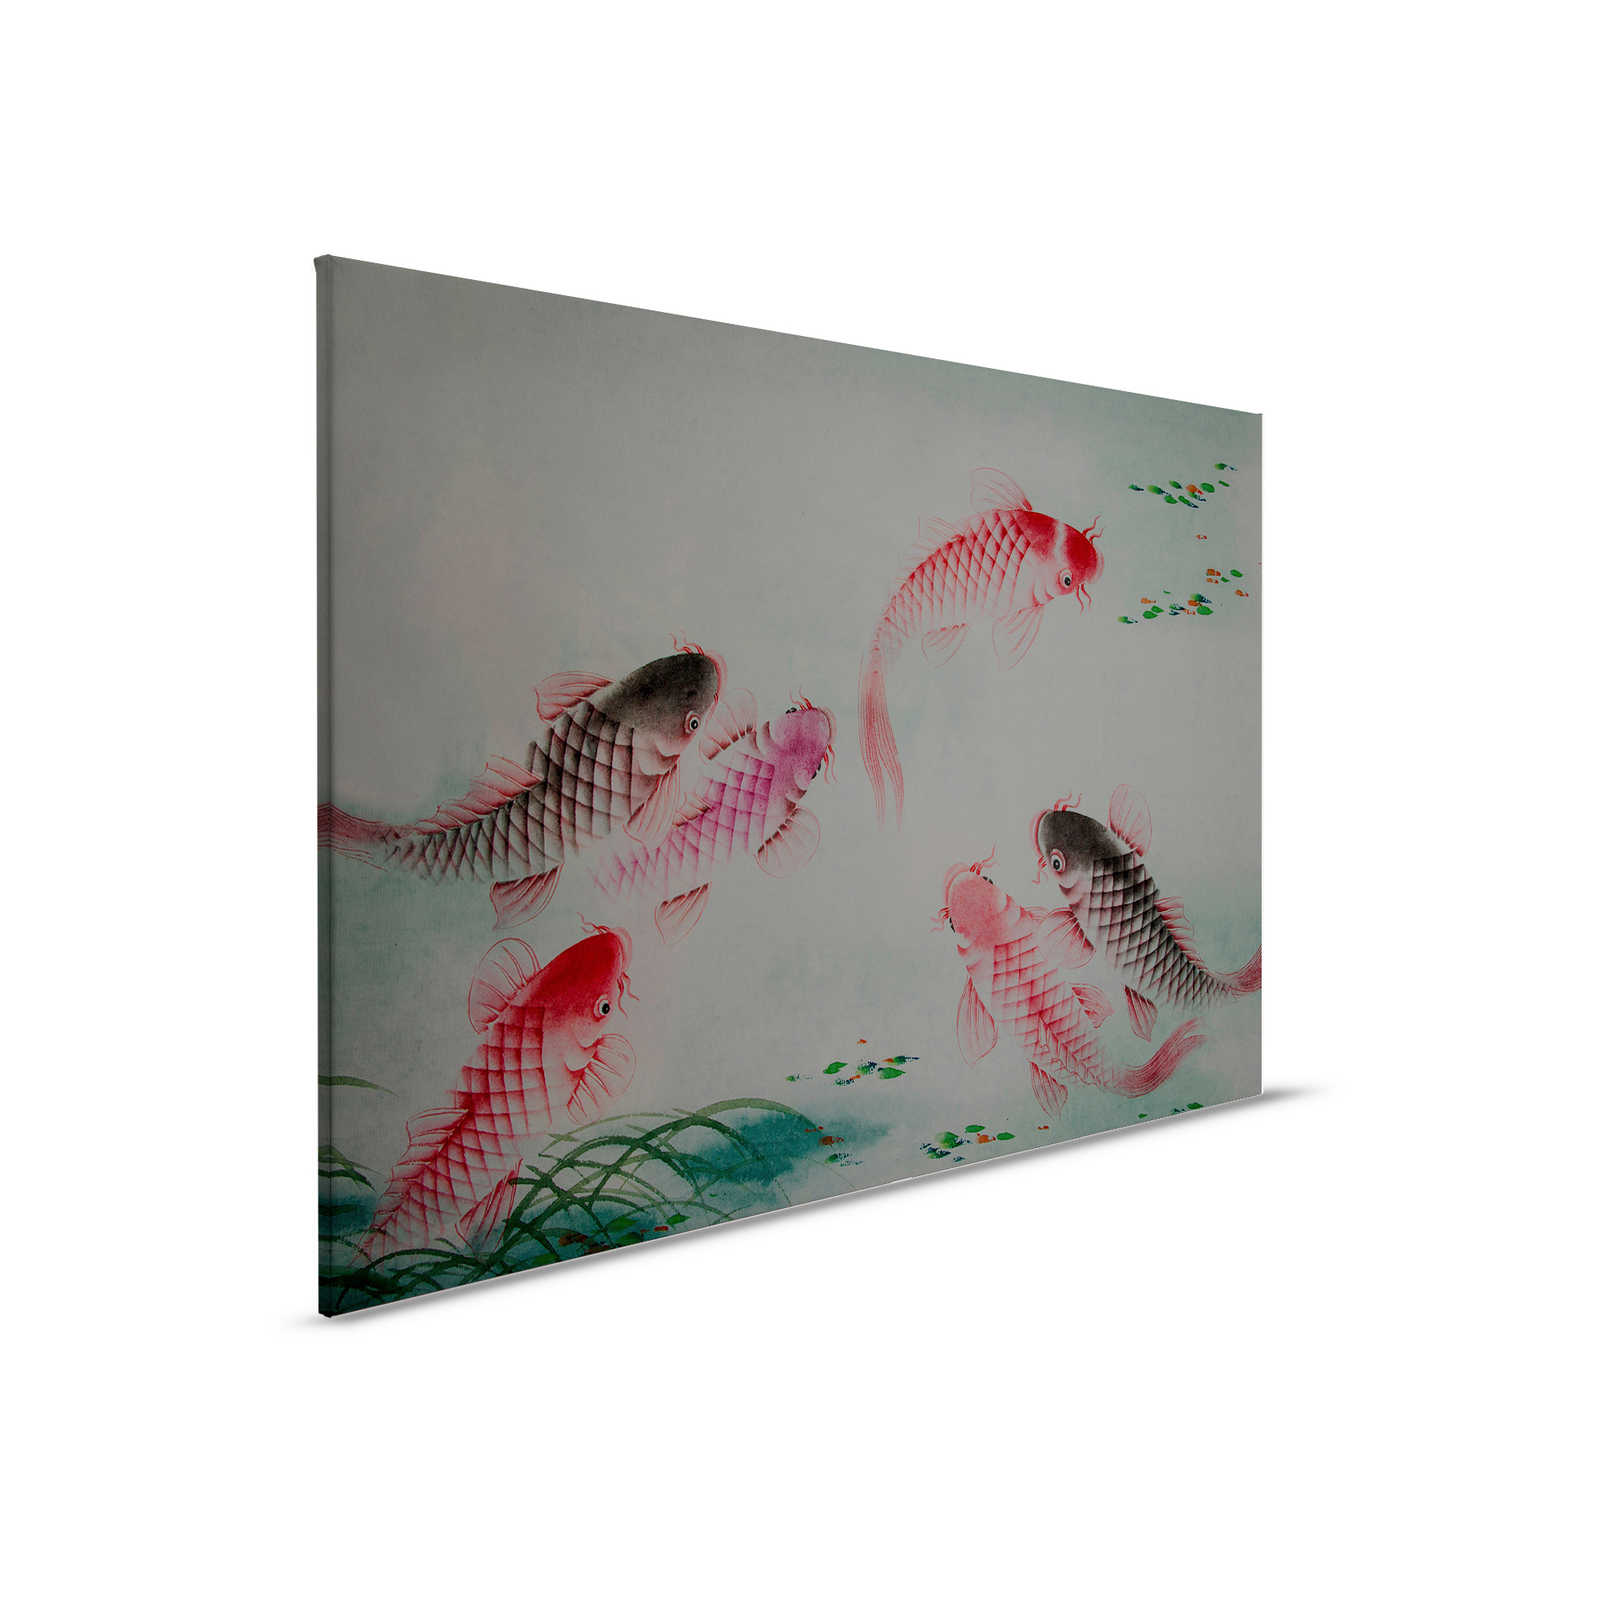         Canvas painting Asia Style with Koi pond | walls by patel - 0,90 m x 0,60 m
    